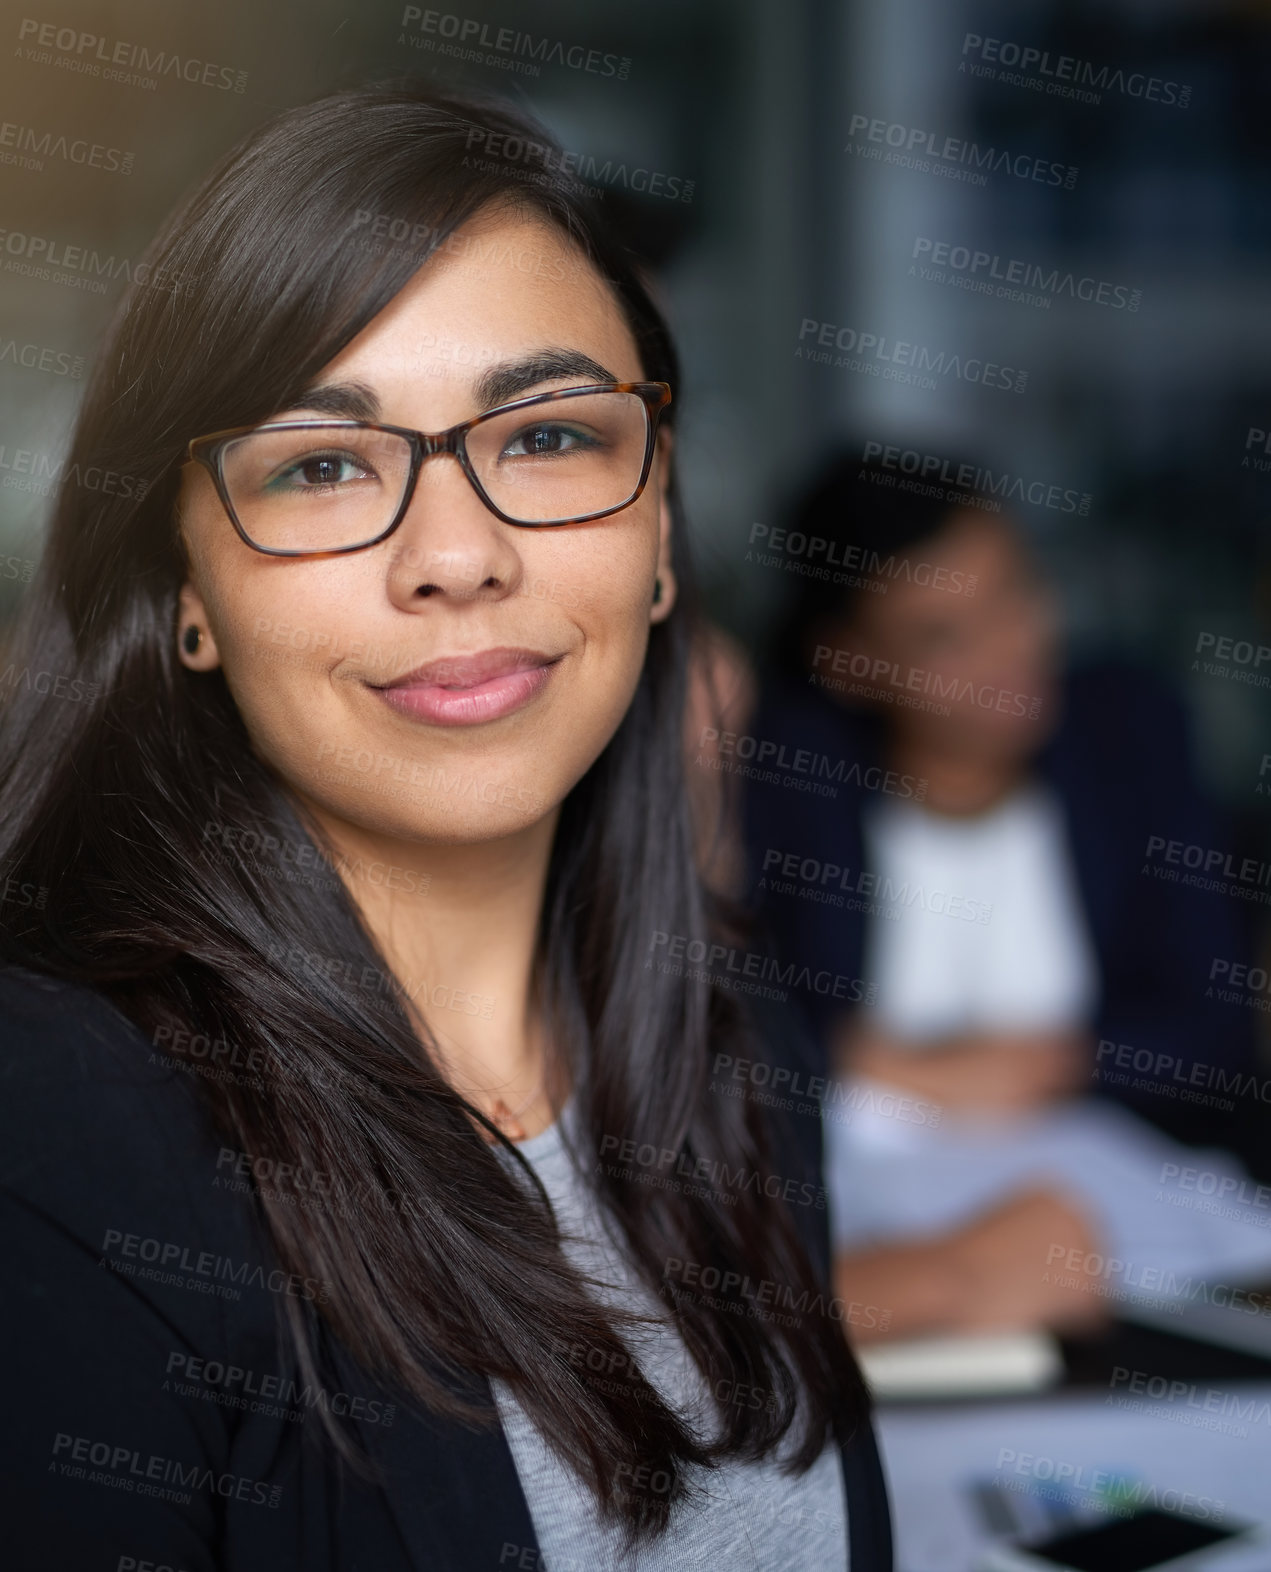 Buy stock photo Portrait of a smiling young businesswoman in an office with colleagues in the background